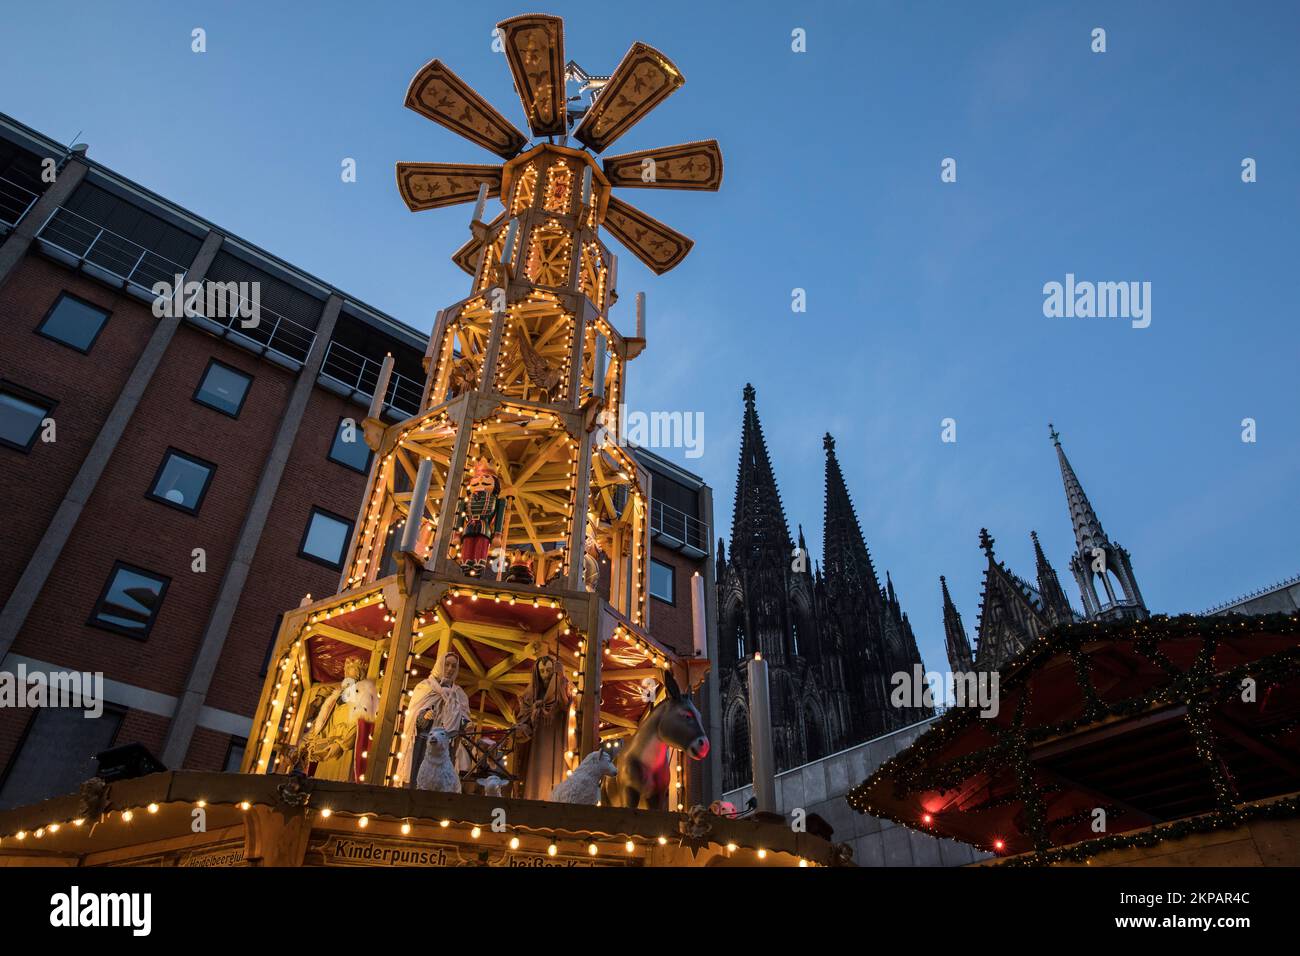 big christmas pyramid on the christmas market at the cathedral, Cologne, Germany. grosse Weihnachtspyramide auf dem Weihnachtsmarkt am Dom, Koeln, Deu Stock Photo